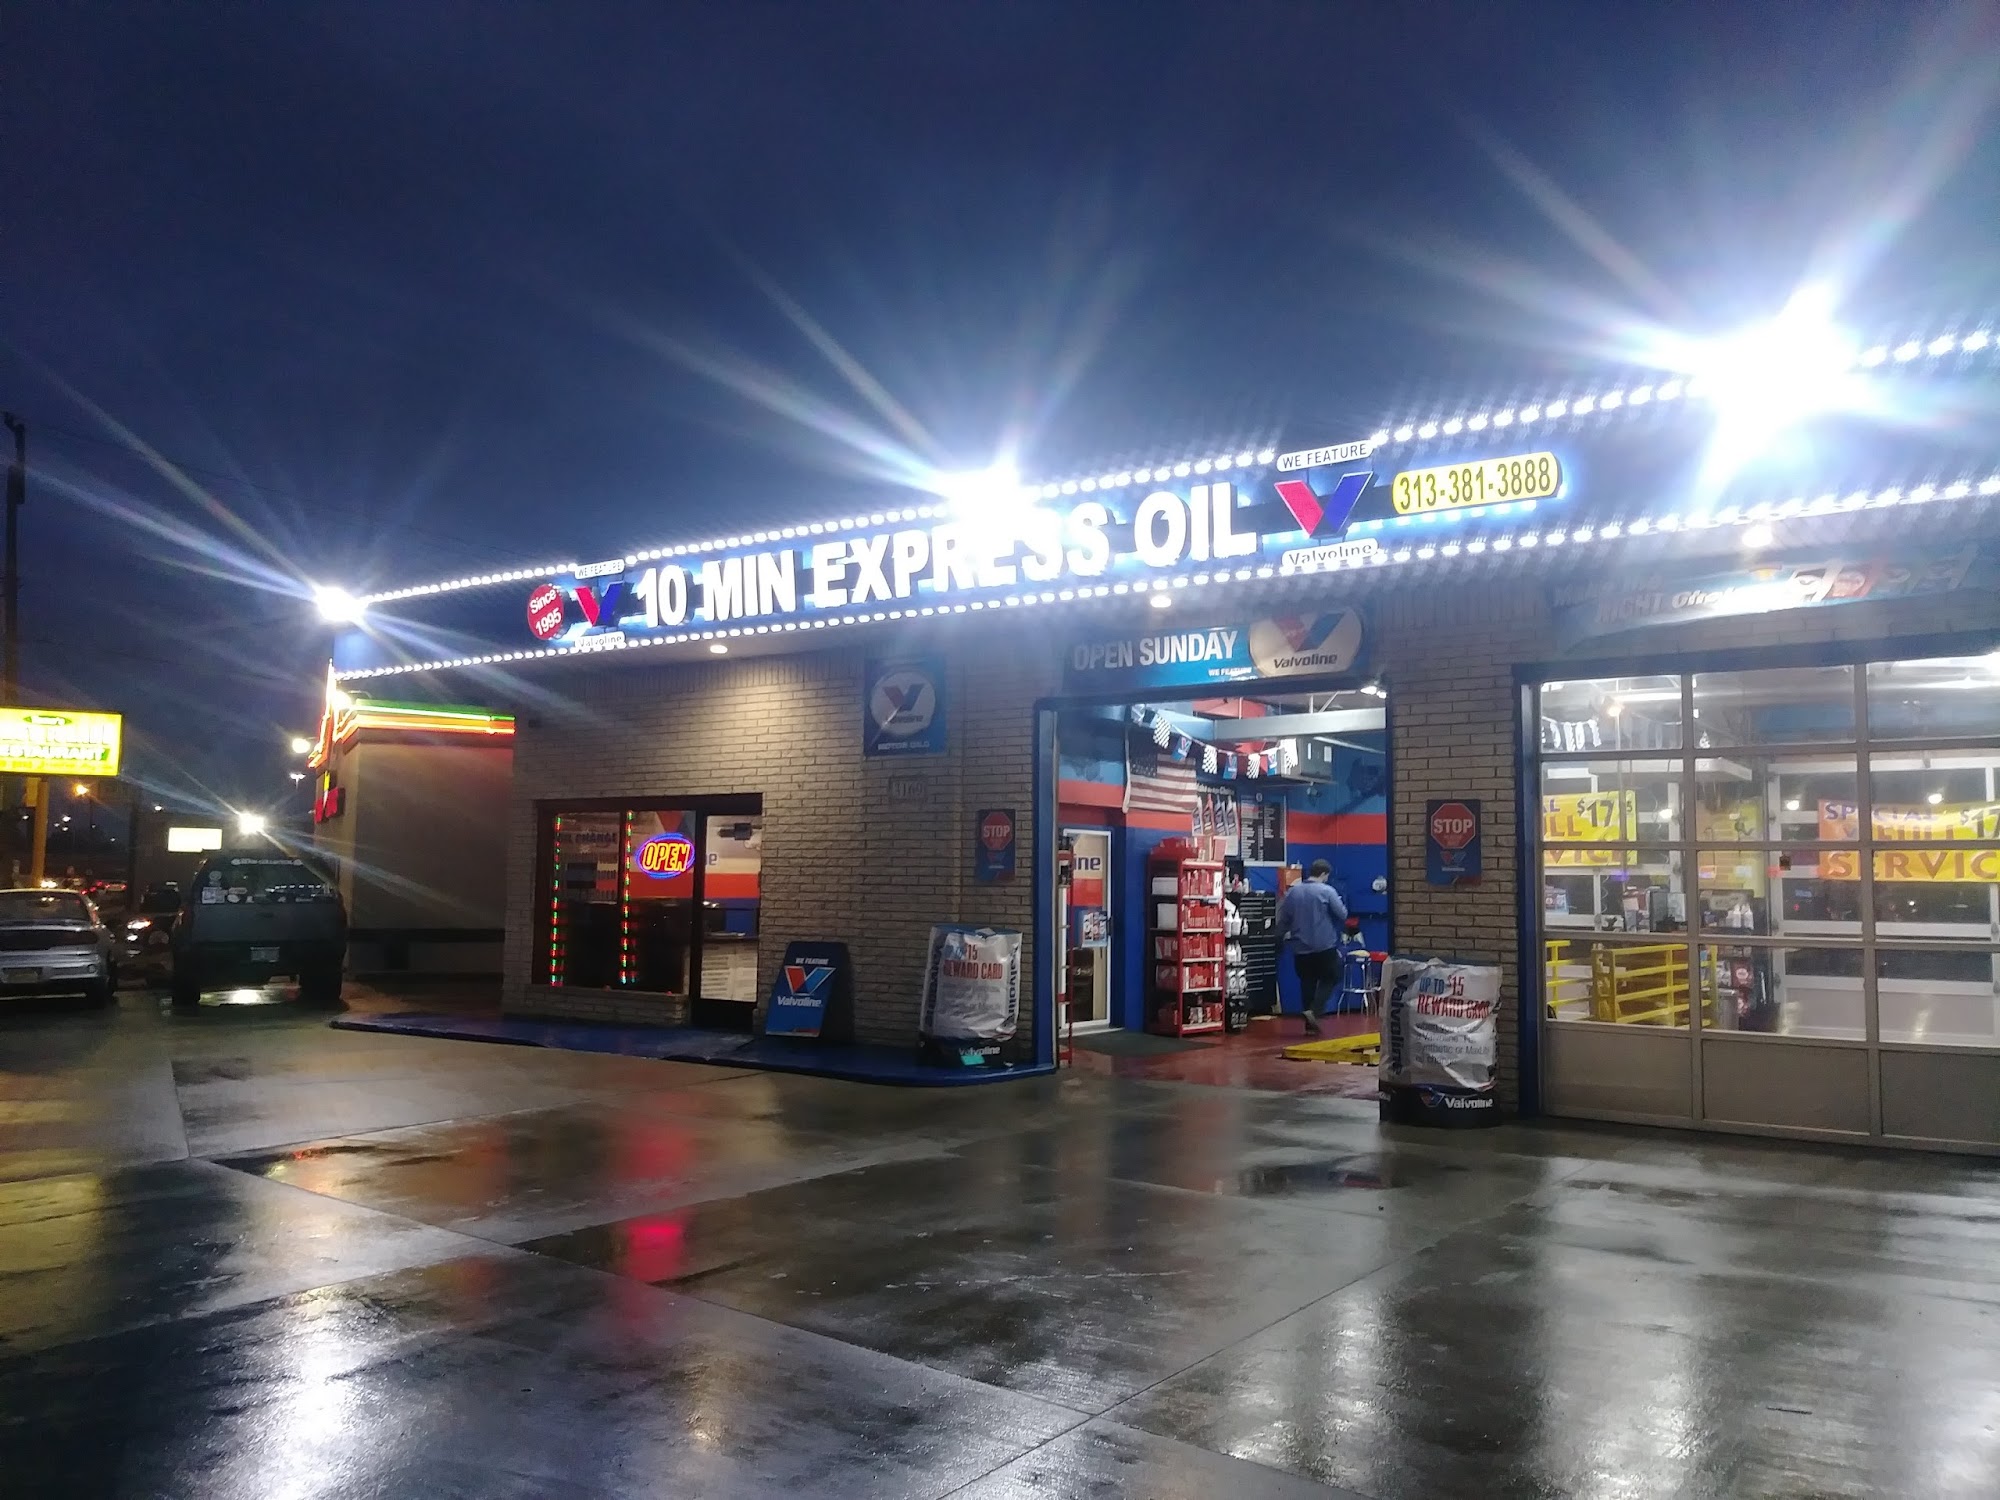 Express oil care